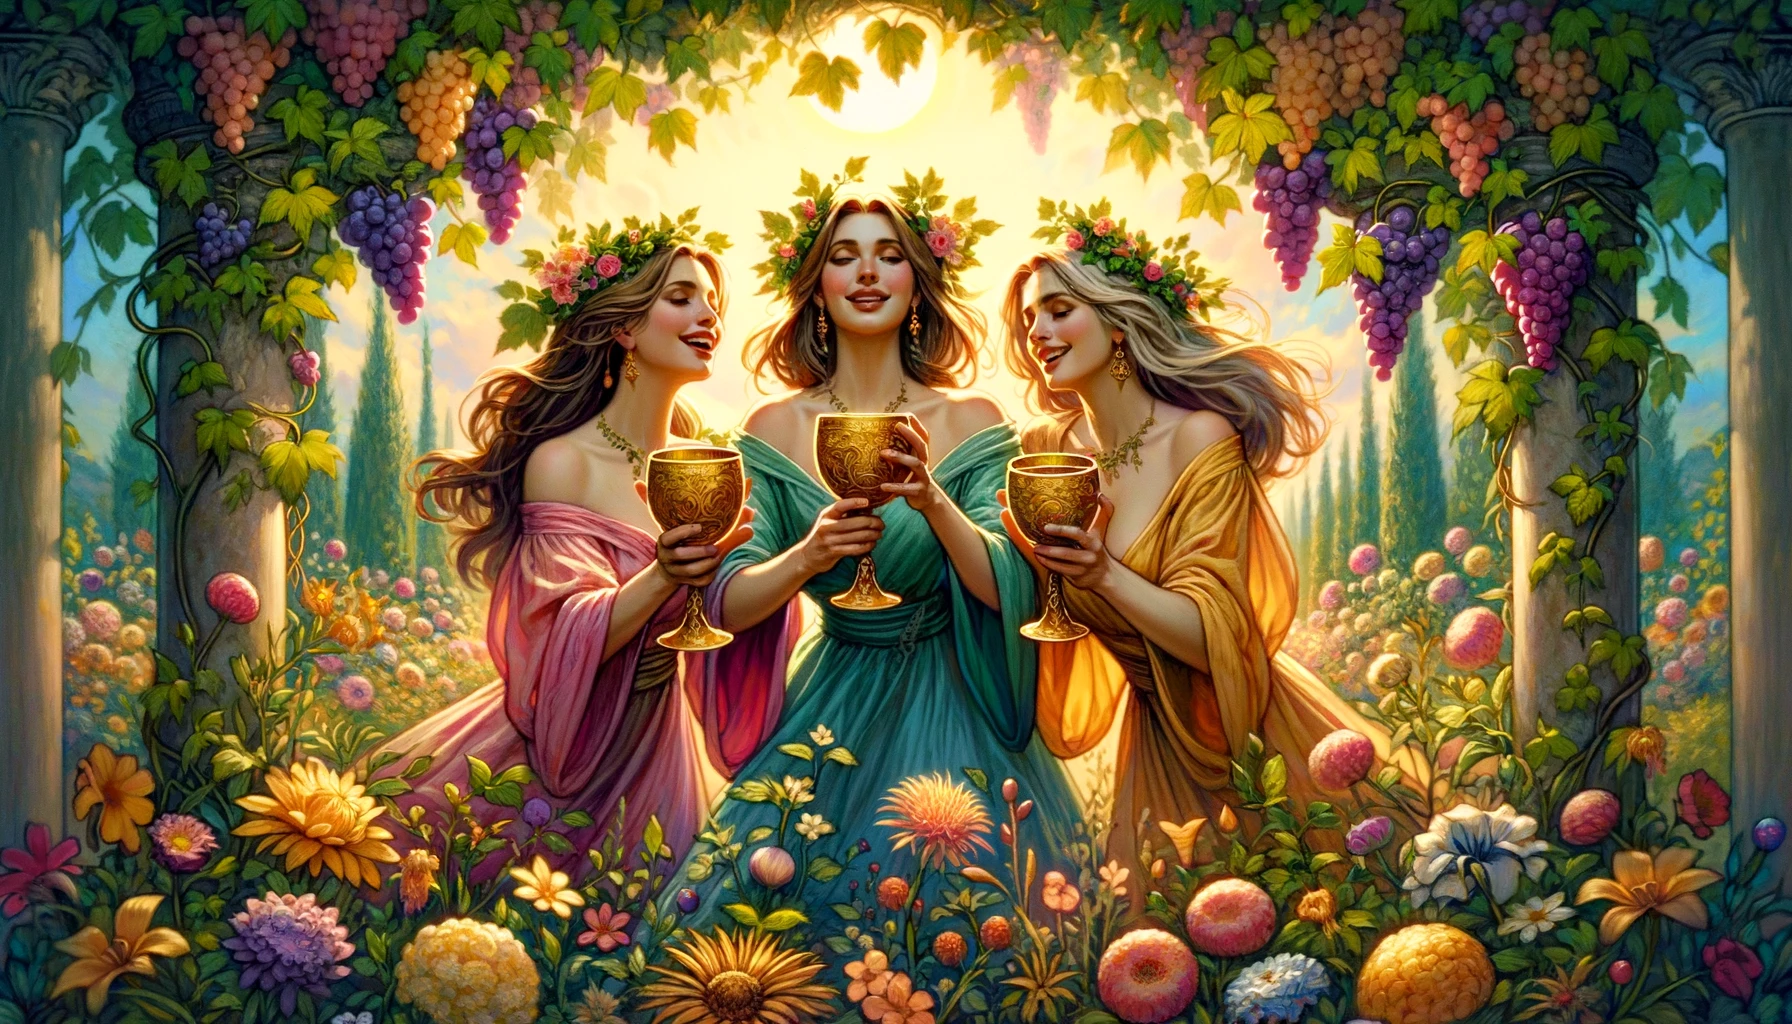 Three women in a lush garden each joyfully raising a golden chalice adorned with grapevines. Around them a vibrant array of flowers blooms symboliz